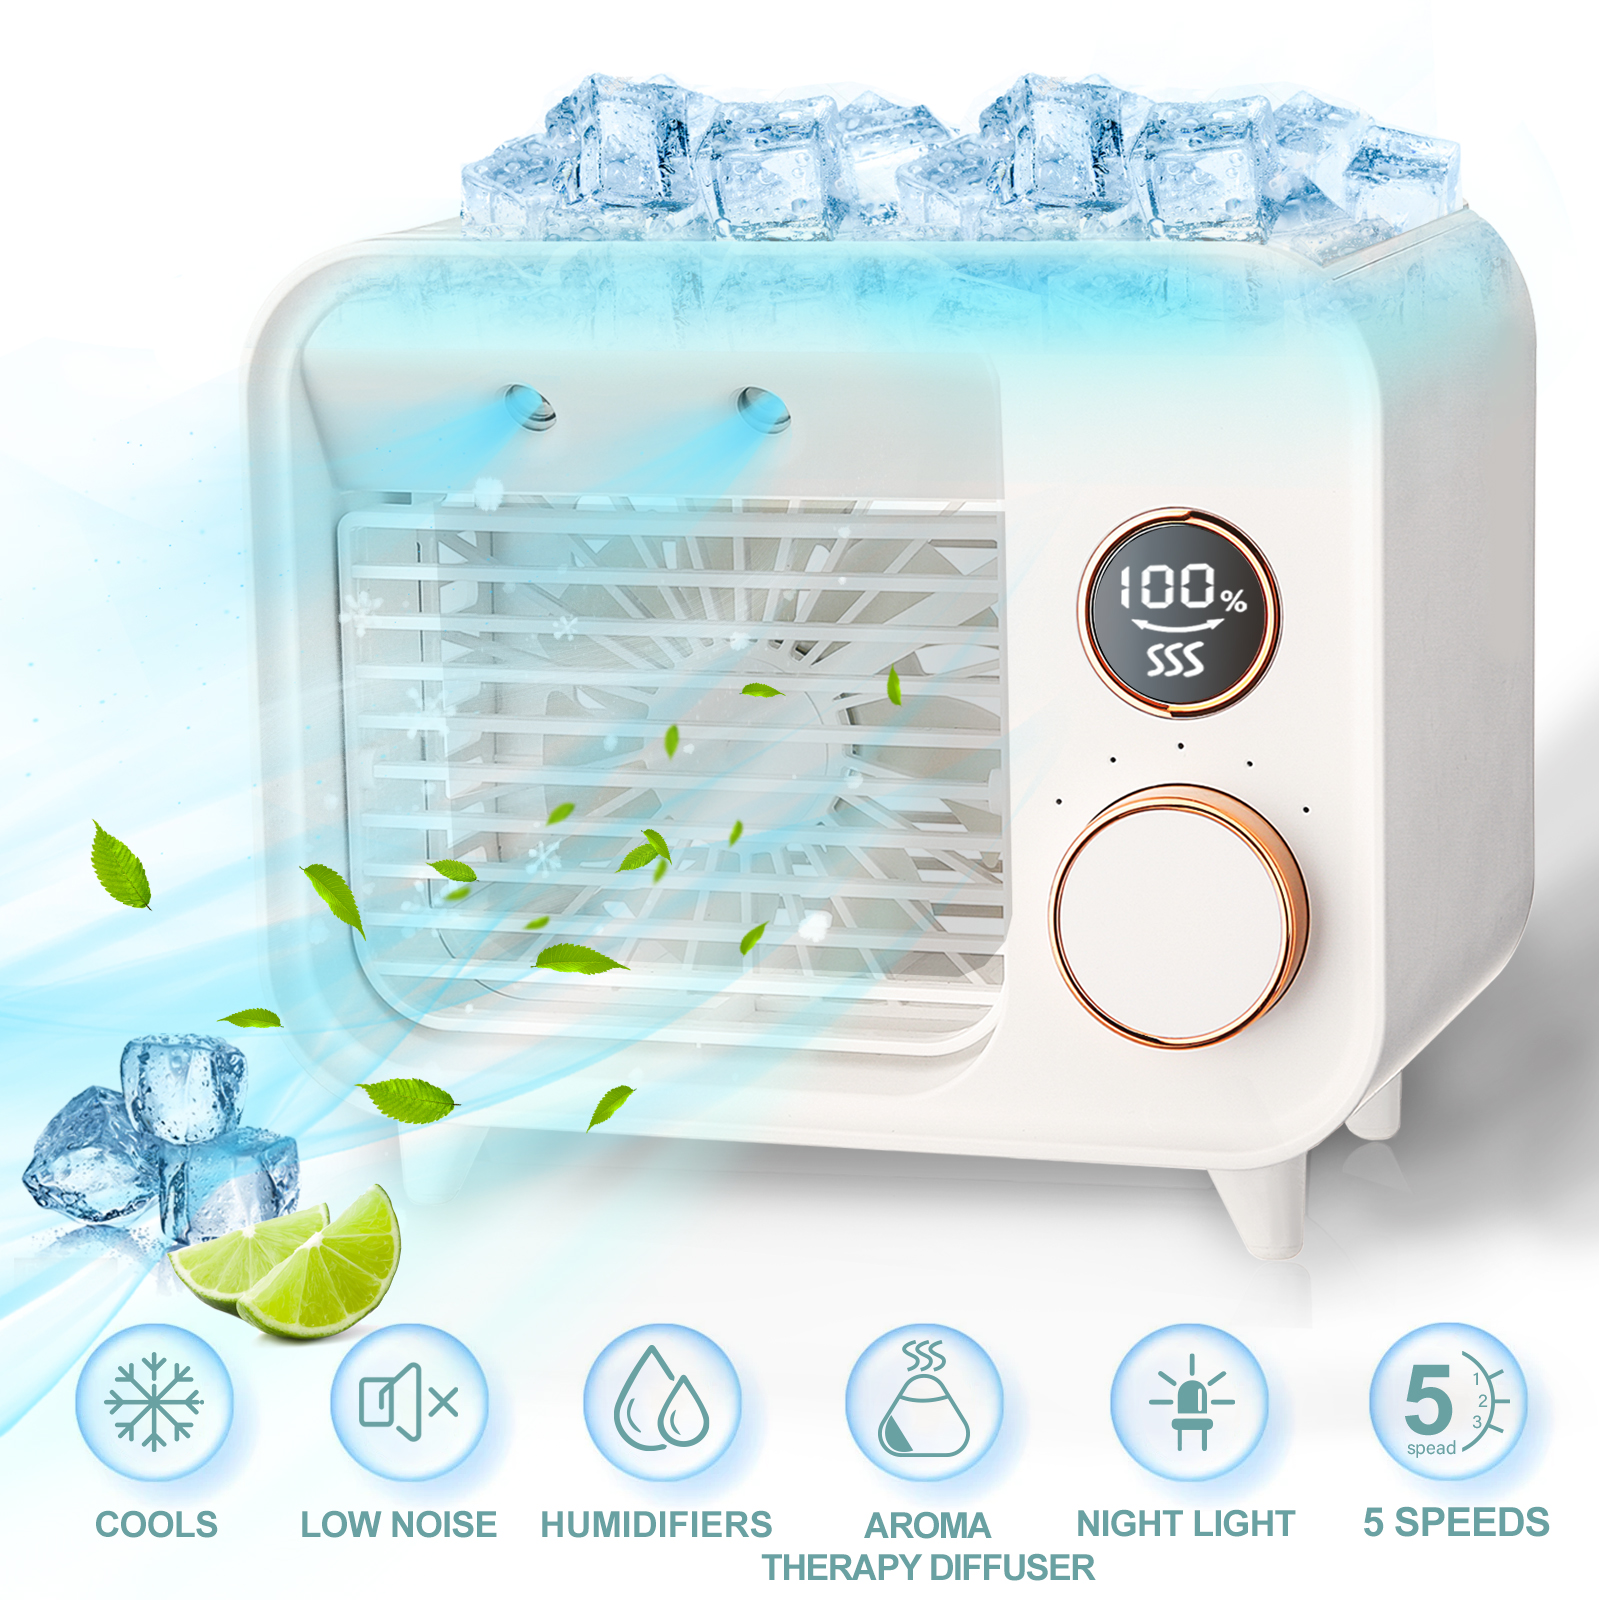 Jeteven-5-in-1-Portable-Air-Cooler-Fan-Humidifiers-5-Wind-Speeds-2000mAh-Battery-with-LED-Night-Ligh-1897155-1